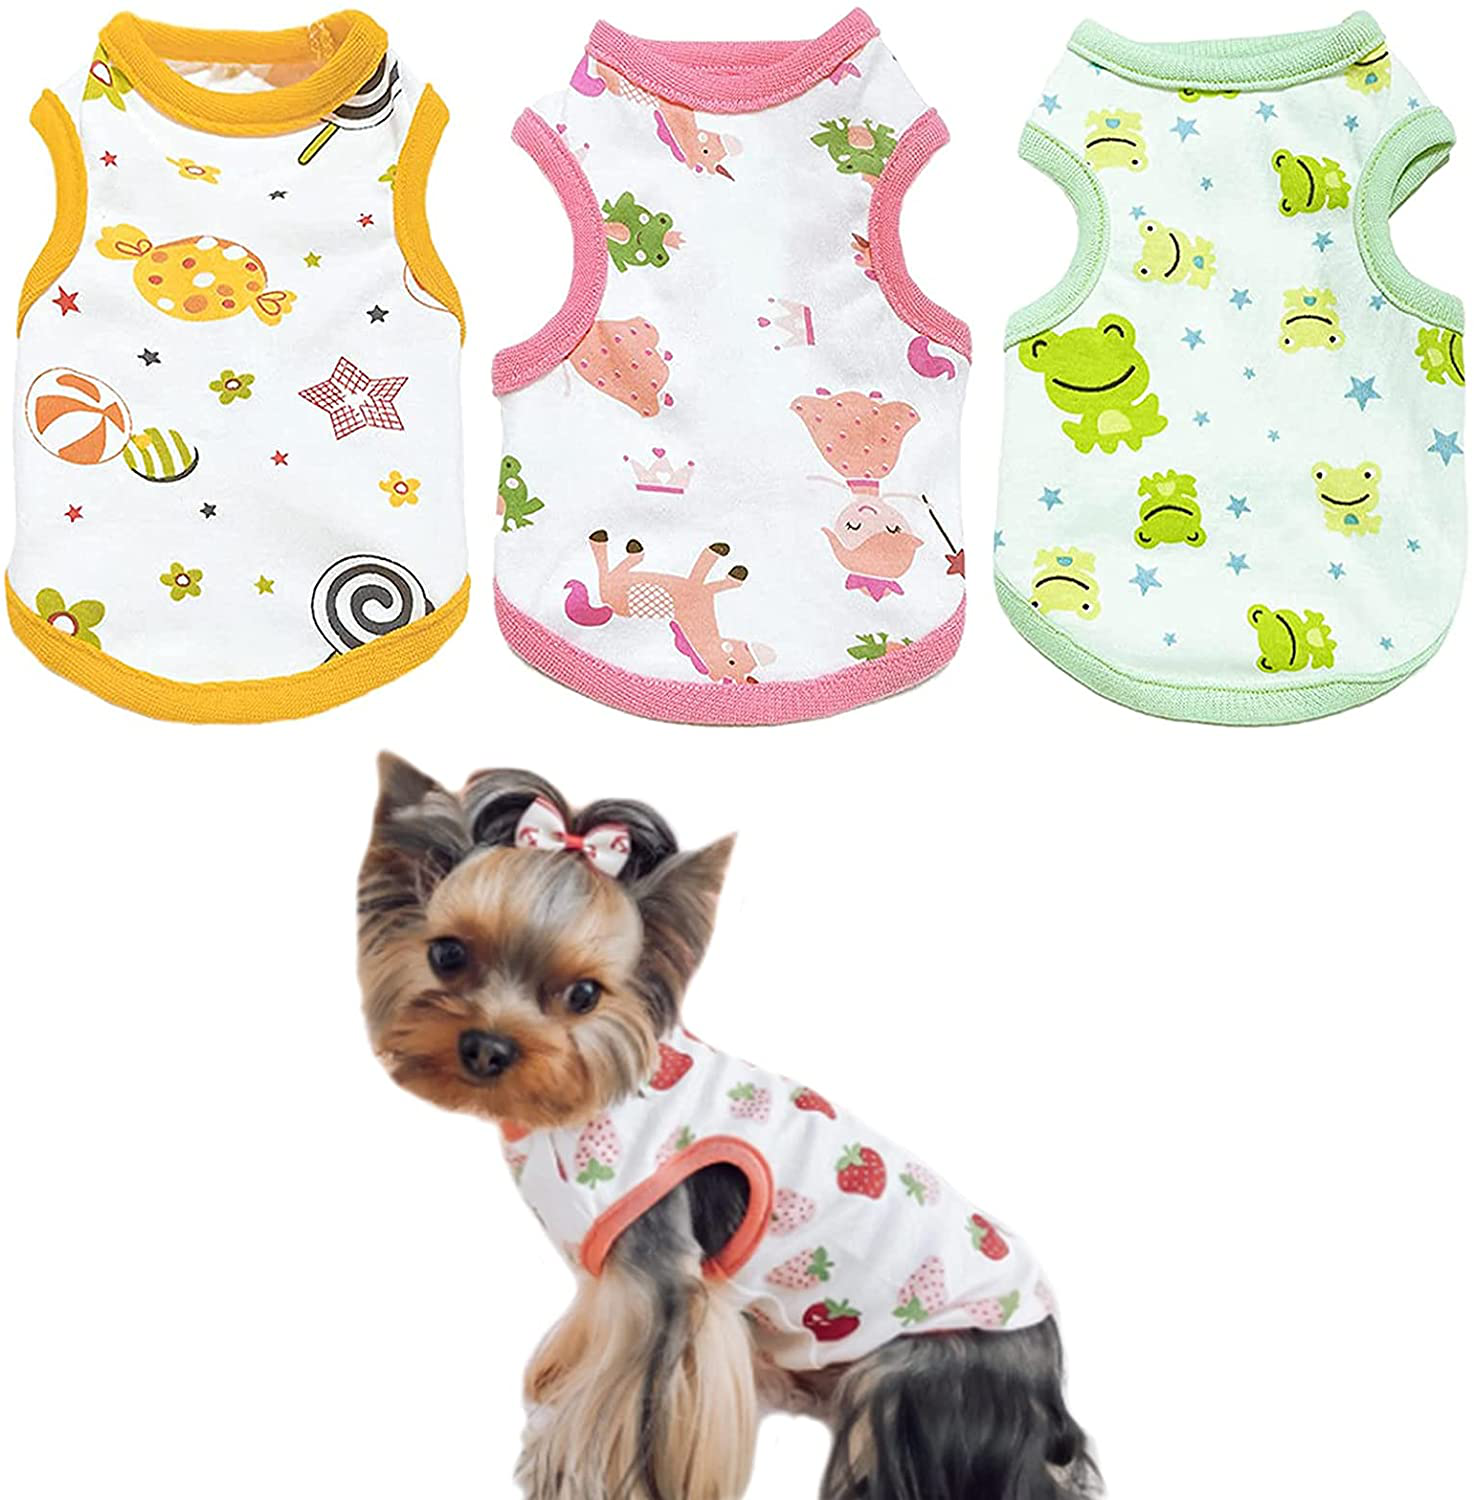 PETCARE 3 Pack Small Dog Shirt Soft Breathable Cotton Pet Puppy Clothes Cat Tee Sleeveless Vest Cute Print T Shirts for Small Breed Dogs Cats Clothing Chihuahua Yorkies Shih Tzu Pomeranian Outfits